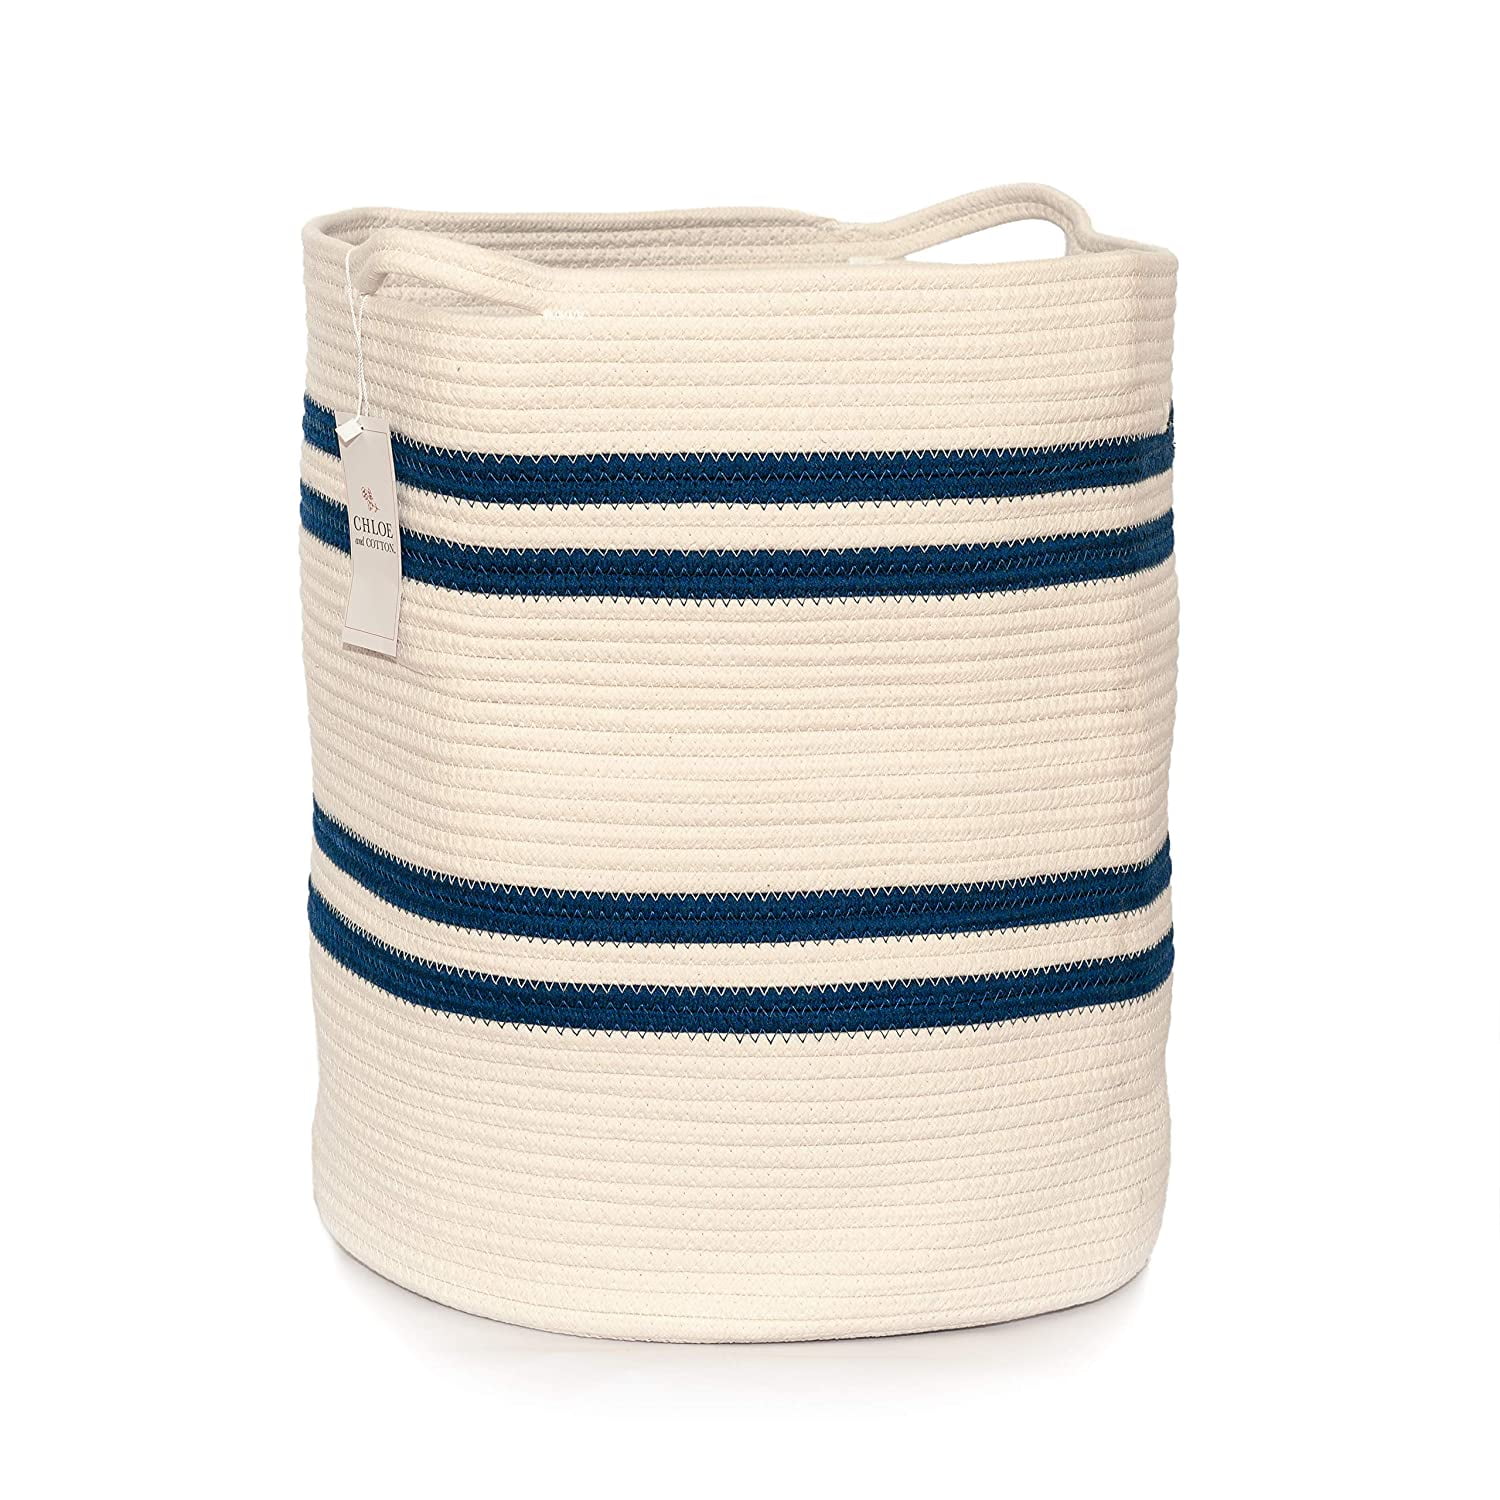 Pillows Sofa Throws Cotton Rope Basket Towels Decorative Woven Storage Blanket Basket Bin with Handles for for Baby Toys Blanket Comforter Cushions Nursery Bin Laundry Hamper